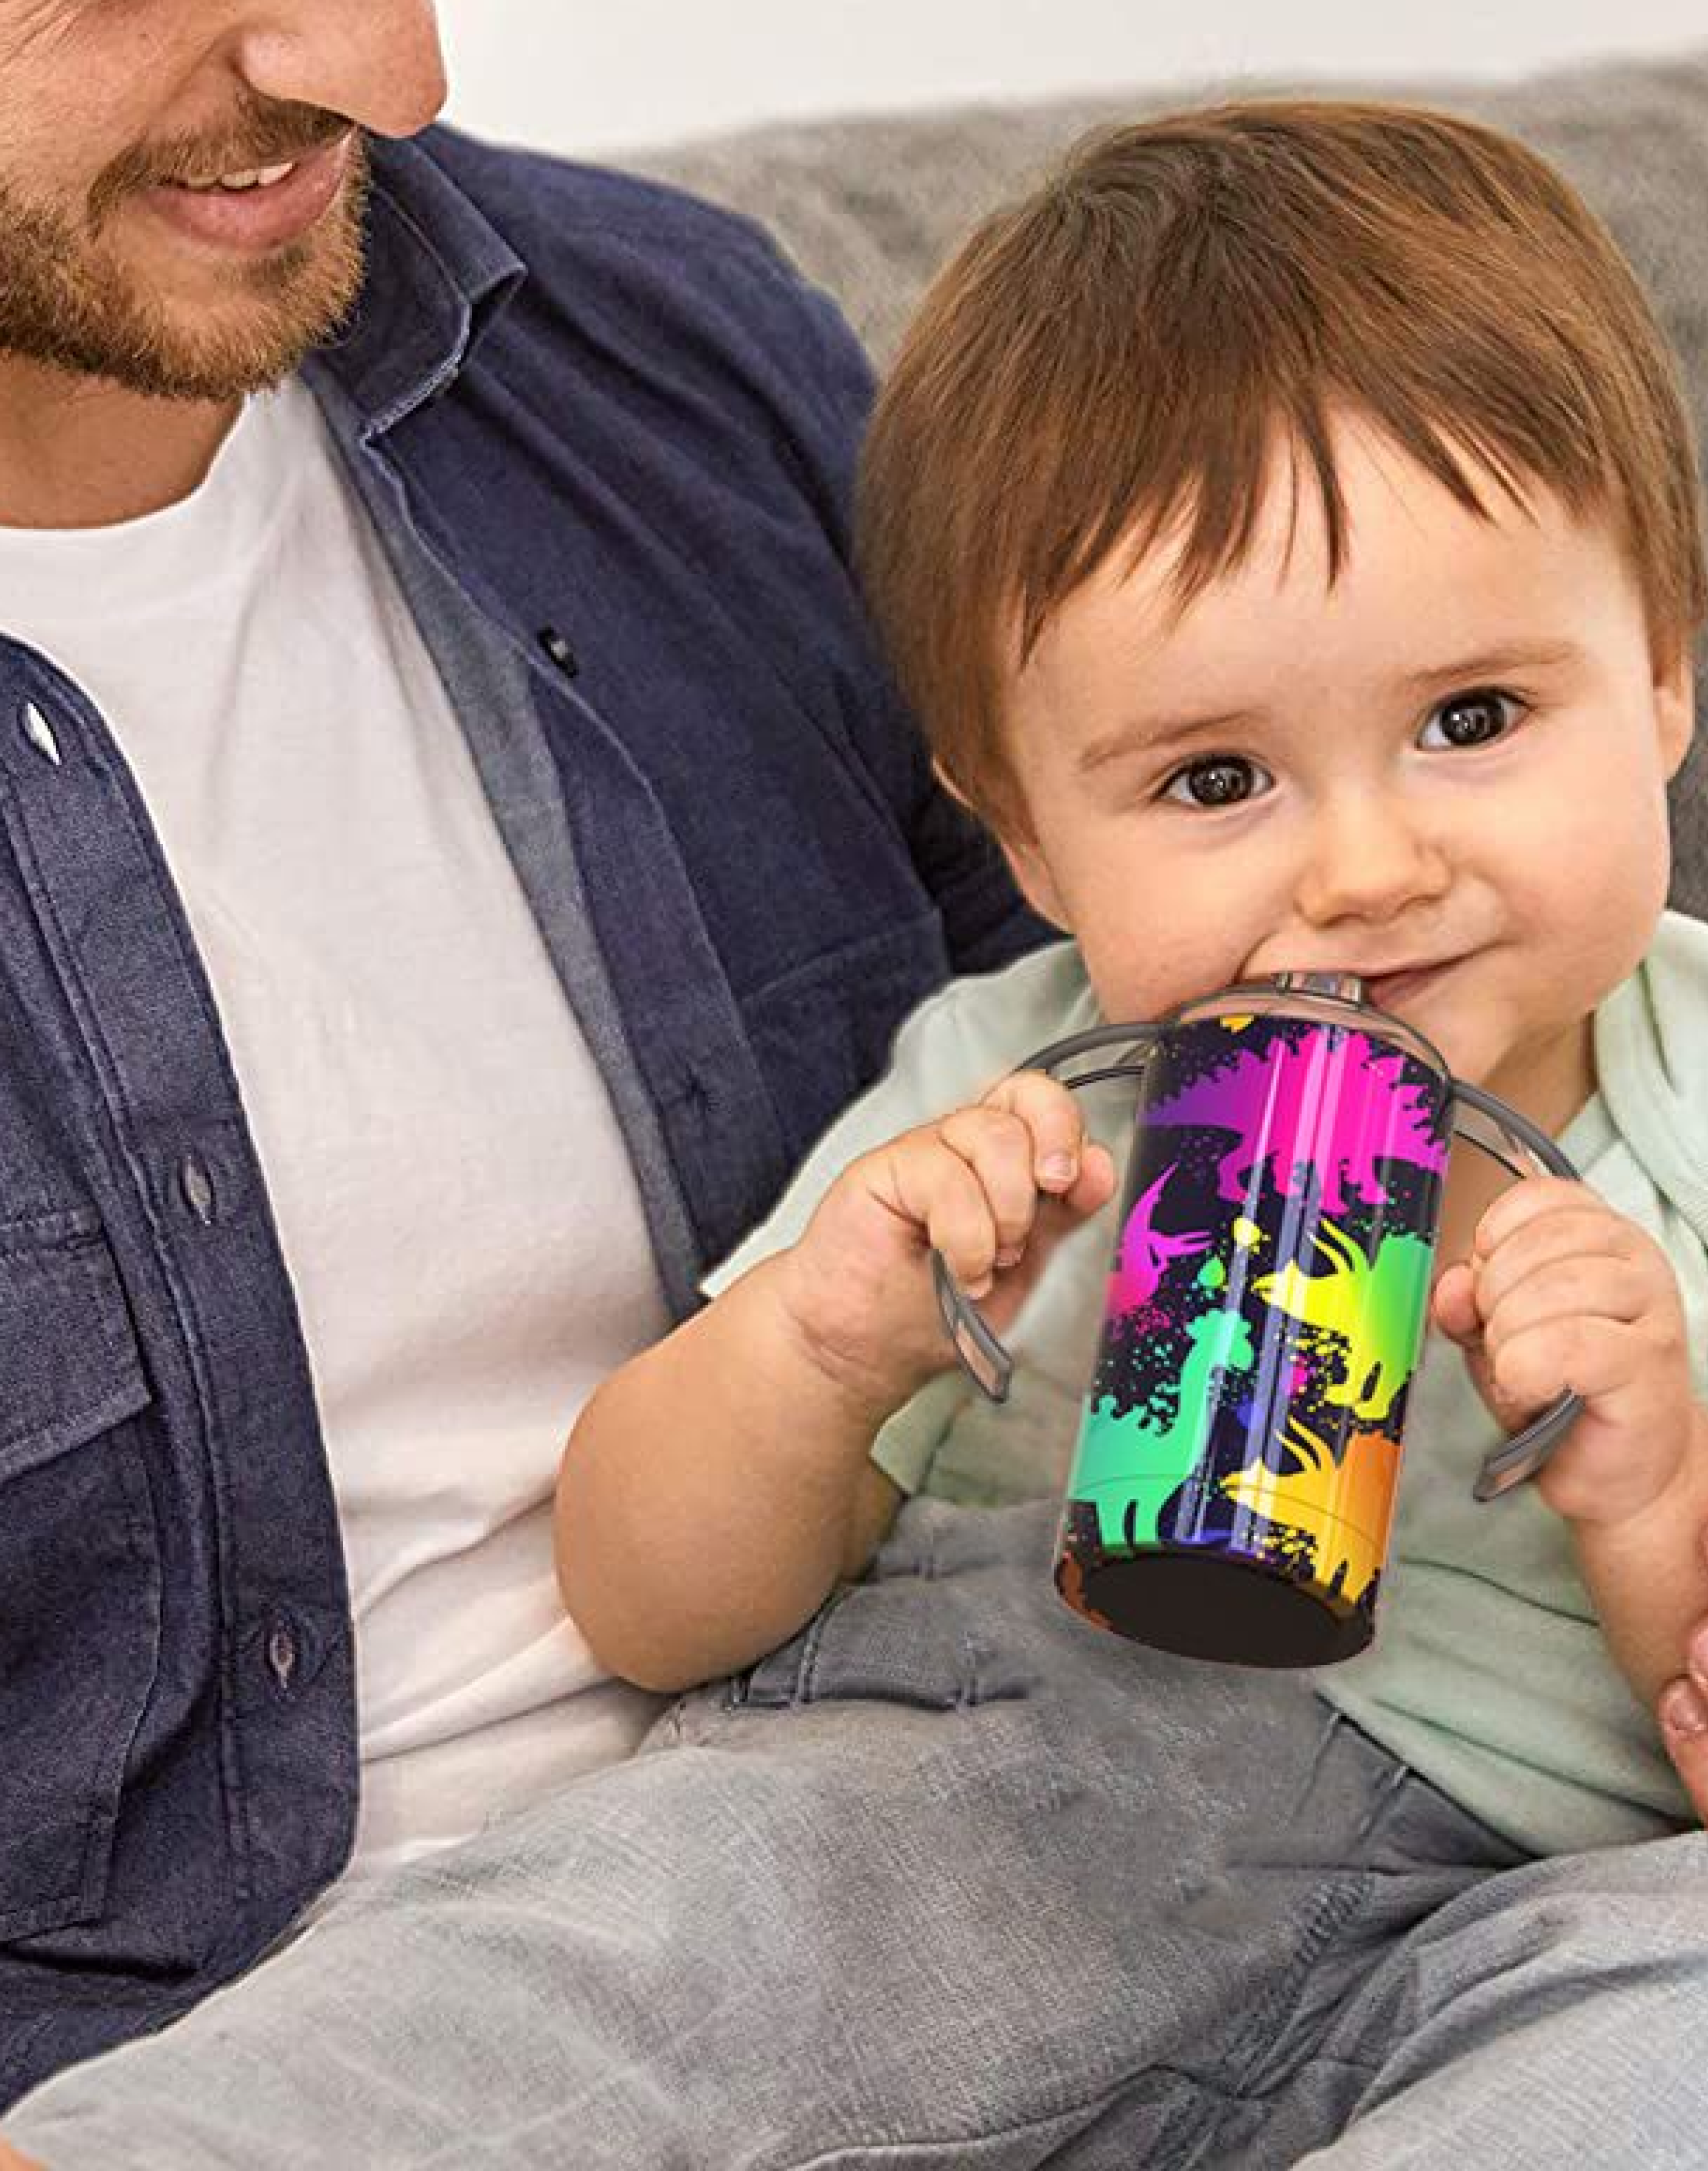 Kid_Sippy_9047b6dd-266d-4c80-adcc-52ae6e1bbfbe.png